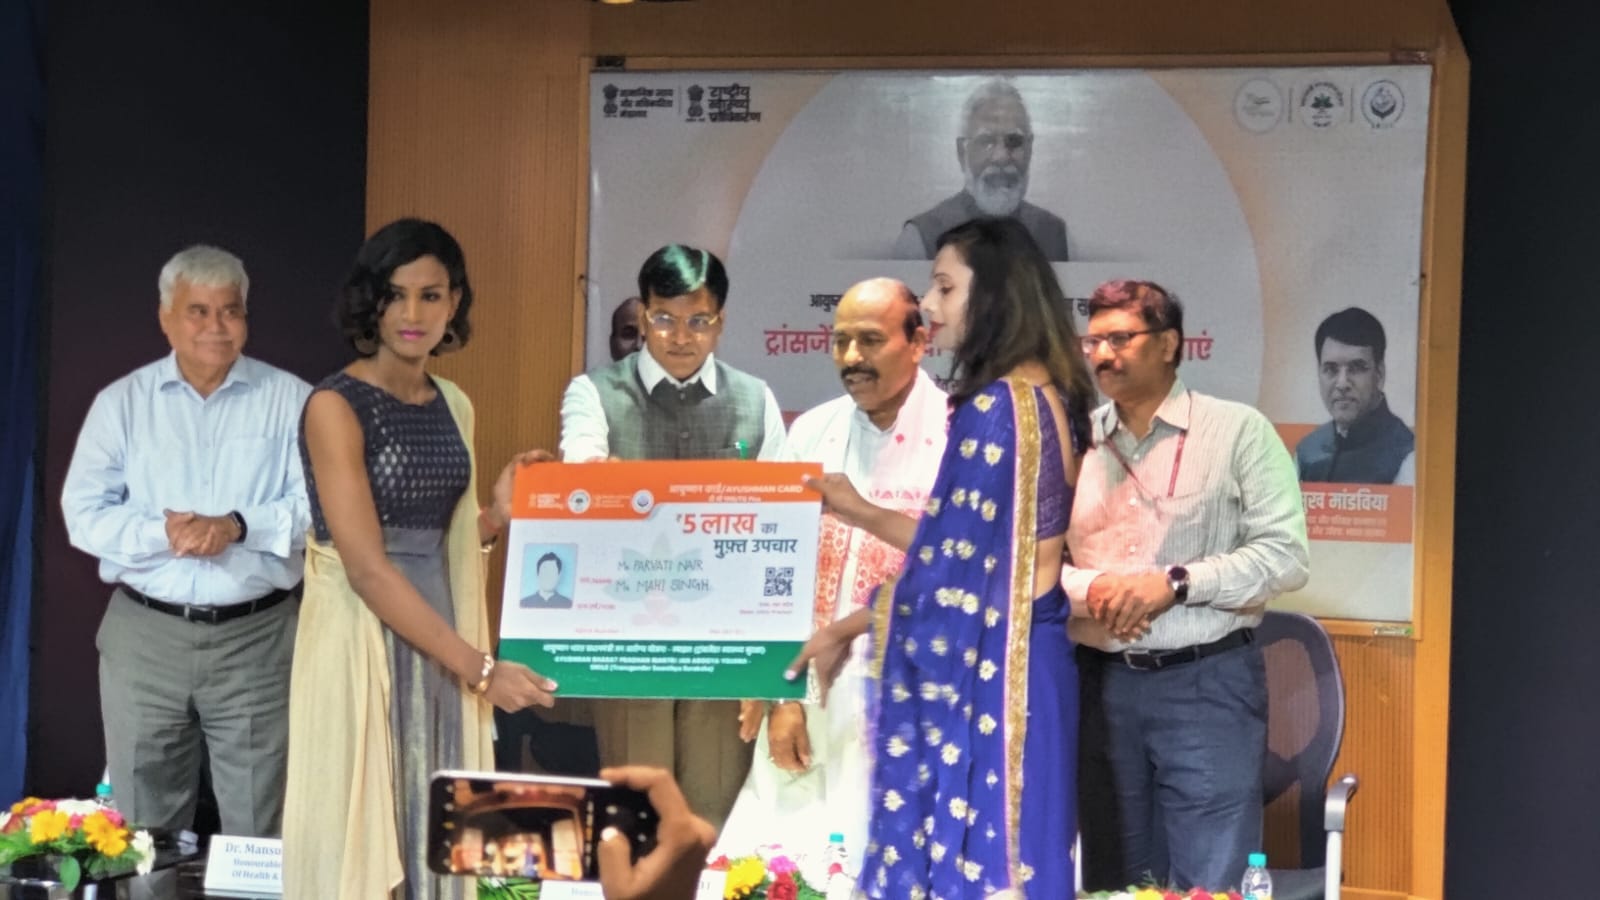 Transgender persons to get holistic health services under Ayushman Bharat- PMJAY